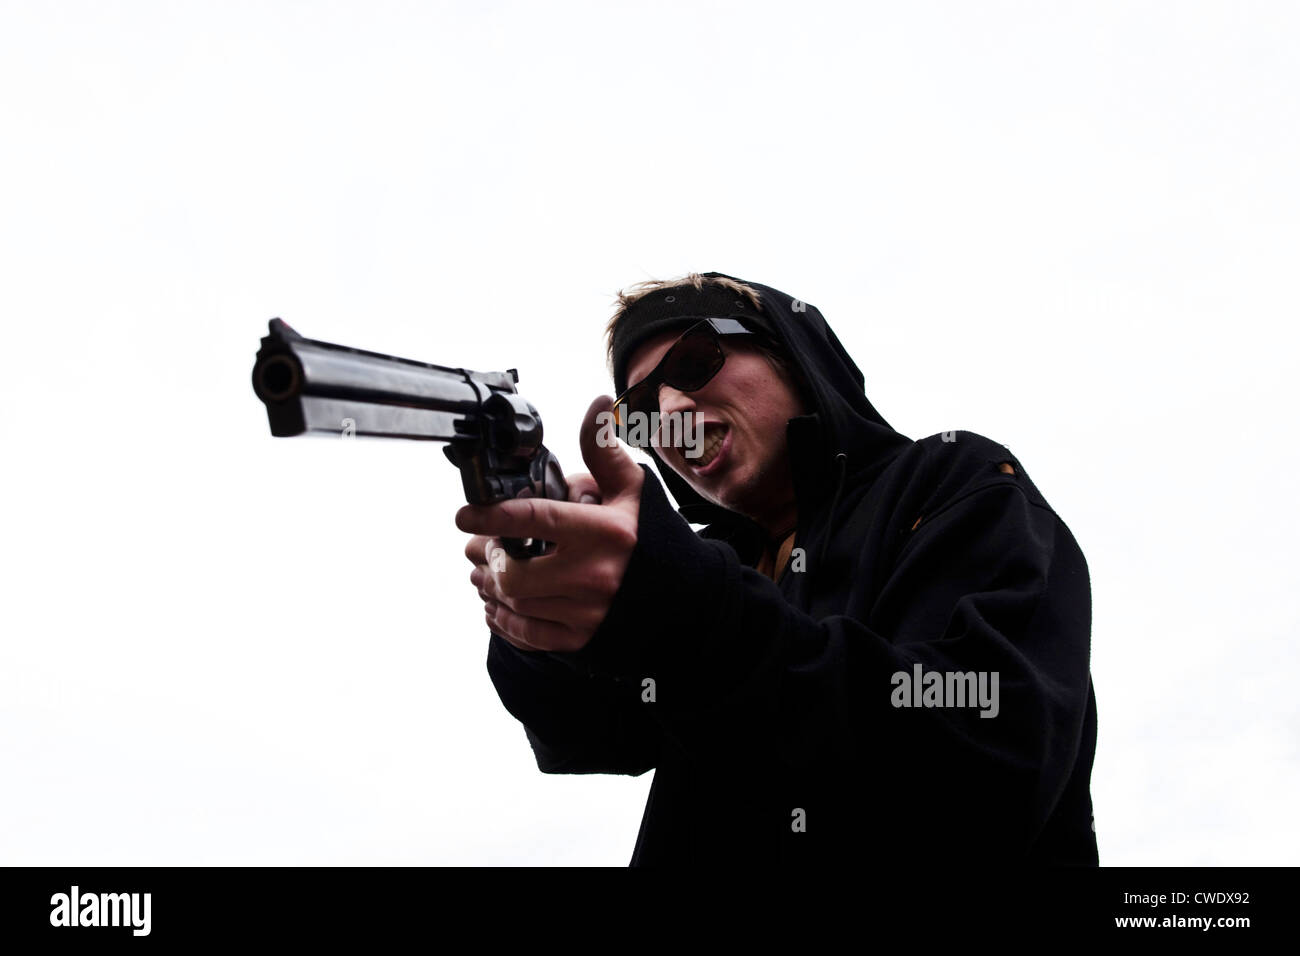 A young man points his large hand gun in Montana. Stock Photo